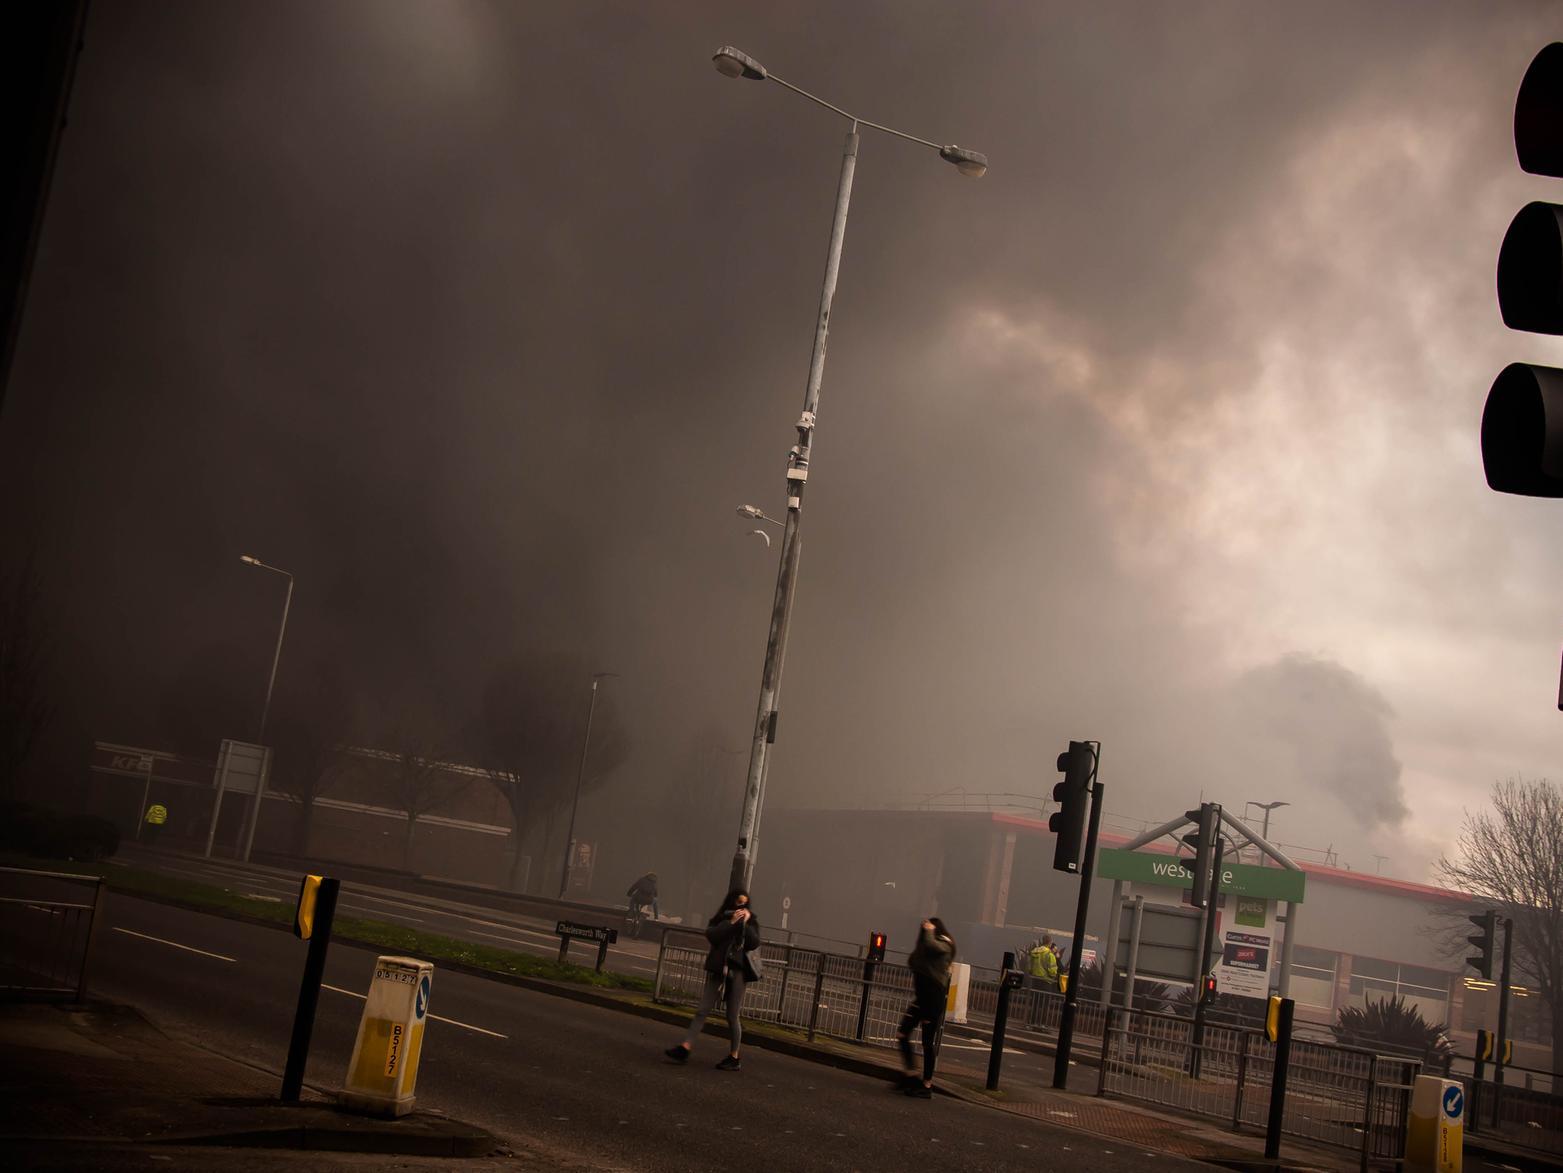 Andrew Parkinson submitted this photo, which shows members of the public covering their faces as they flee the fire.